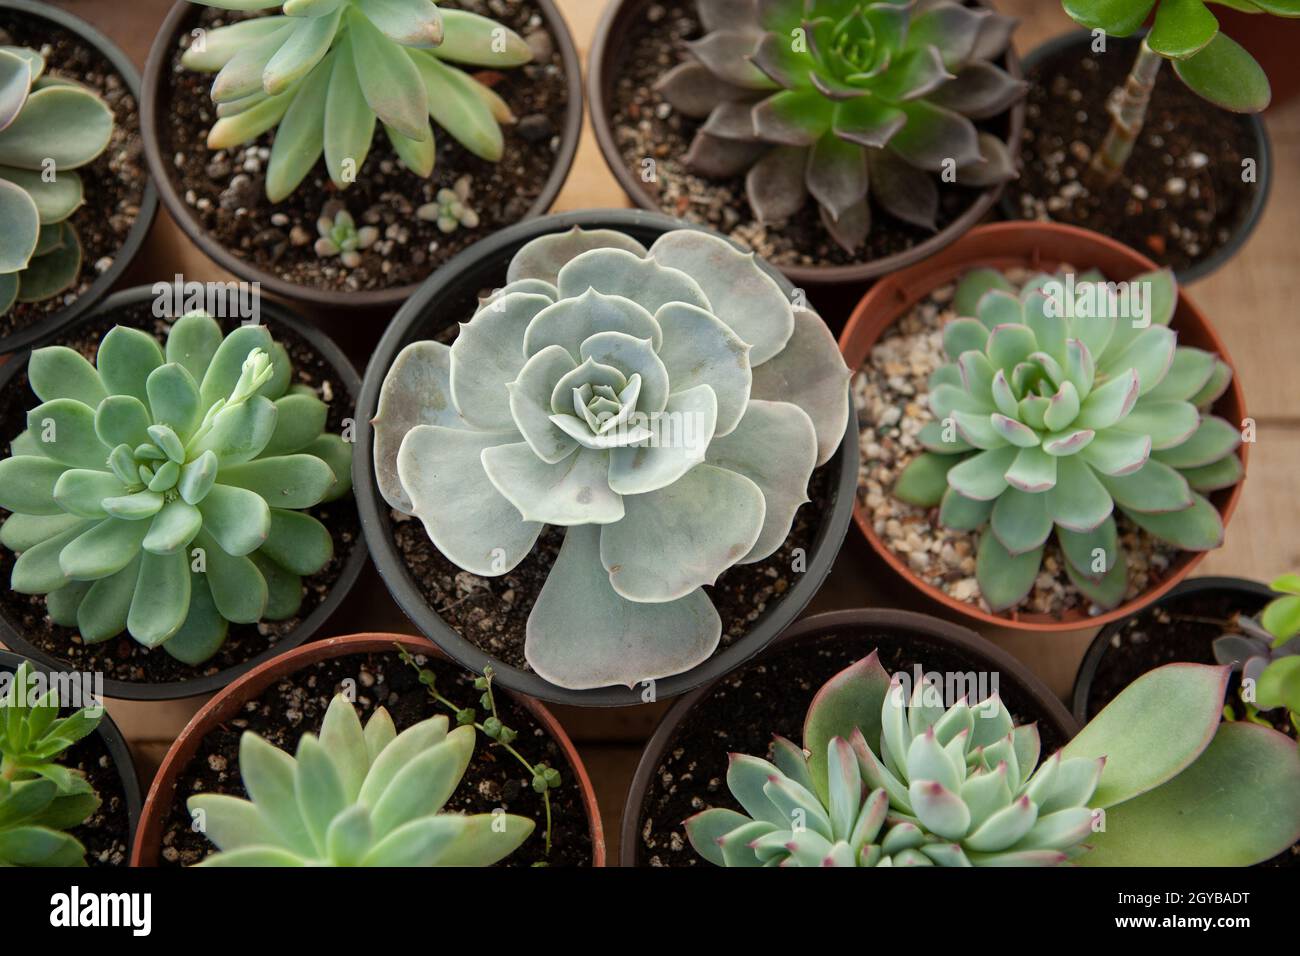 Succulents rosettes in pots, top view. Composition of colorful varieties of echeveria and sedum plants. High quality photo Stock Photo